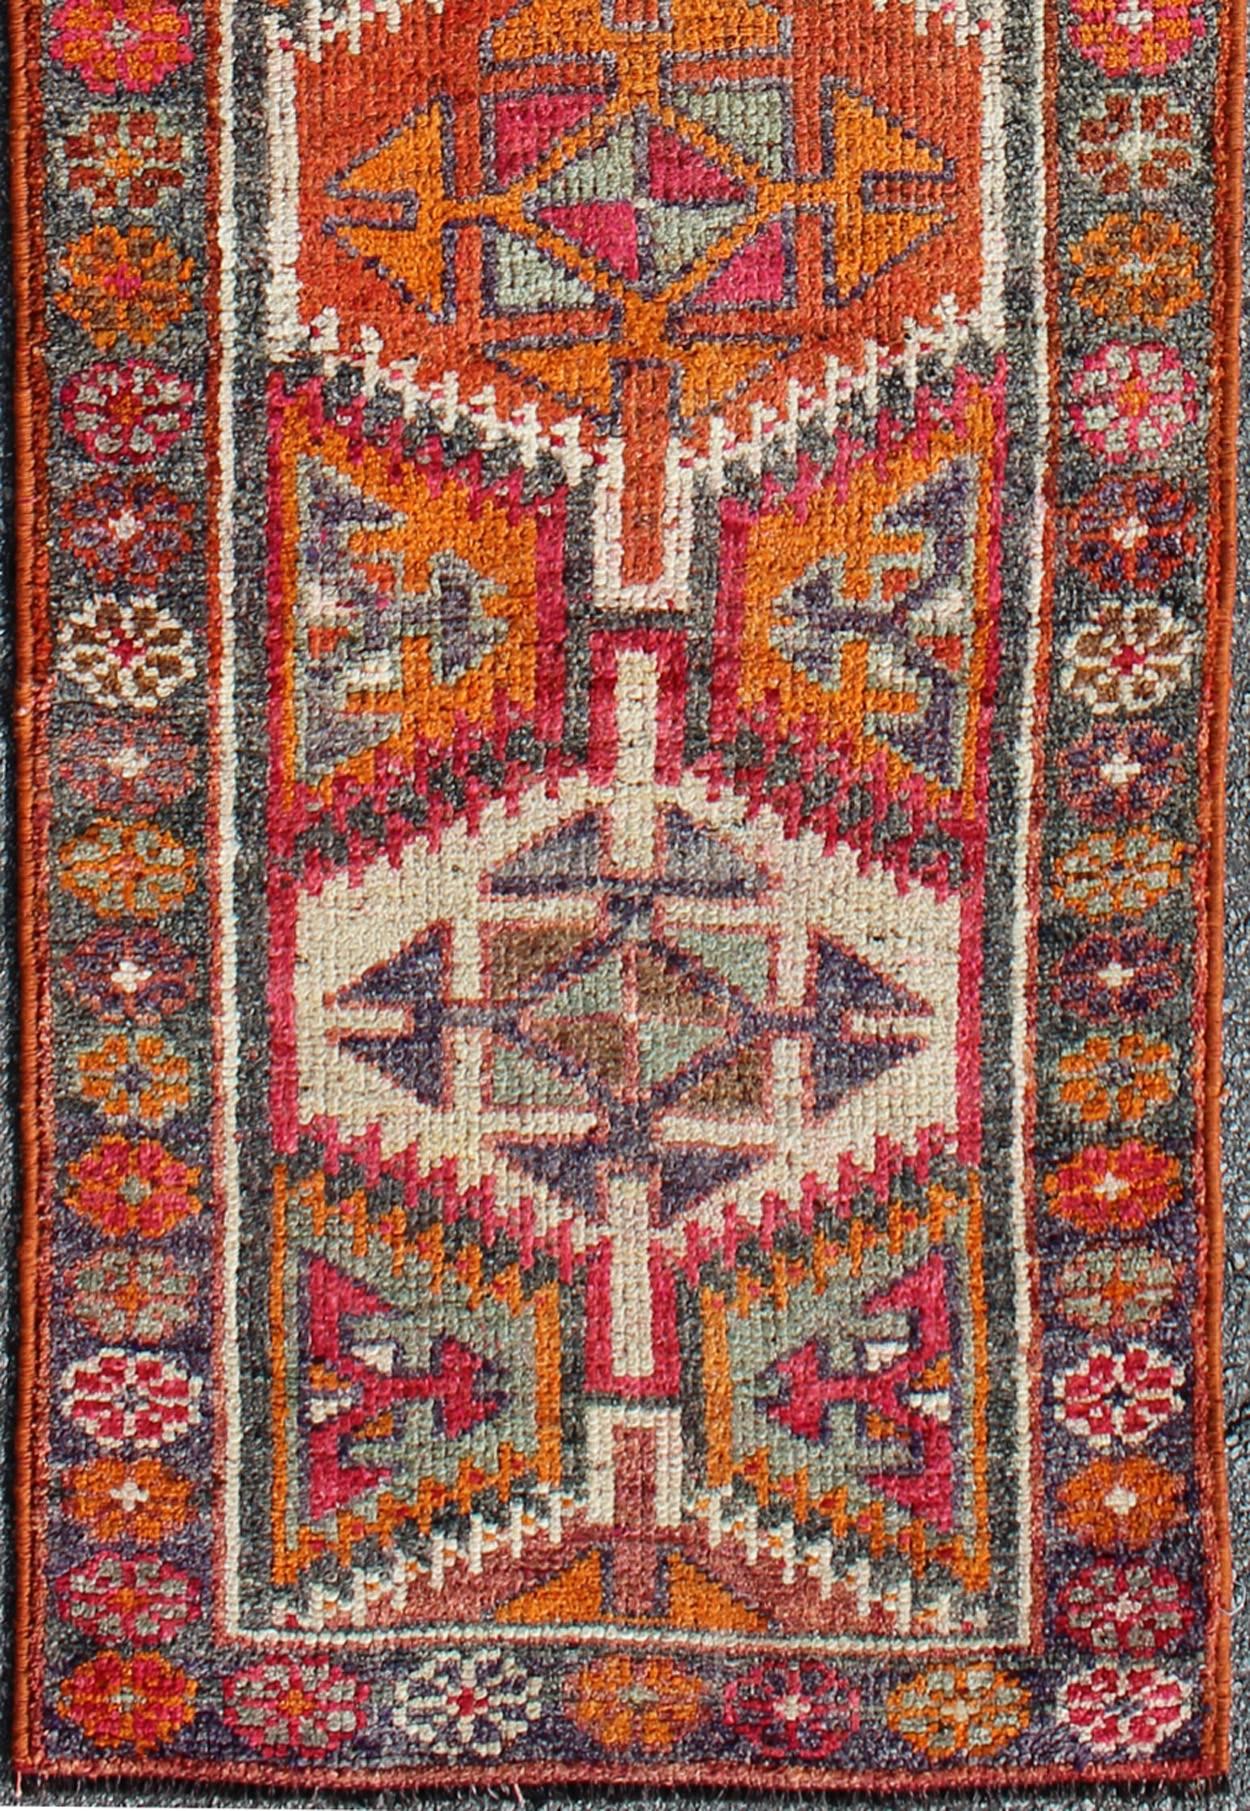 Vintage Turkish Oushak runner with four colorful tribal medallions, rug en-165601, country of origin / type: Turkey / Oushak, circa 1950

This vintage Turkish Oushak rug (circa mid-20th century) features a unique blend of colors and an intricately